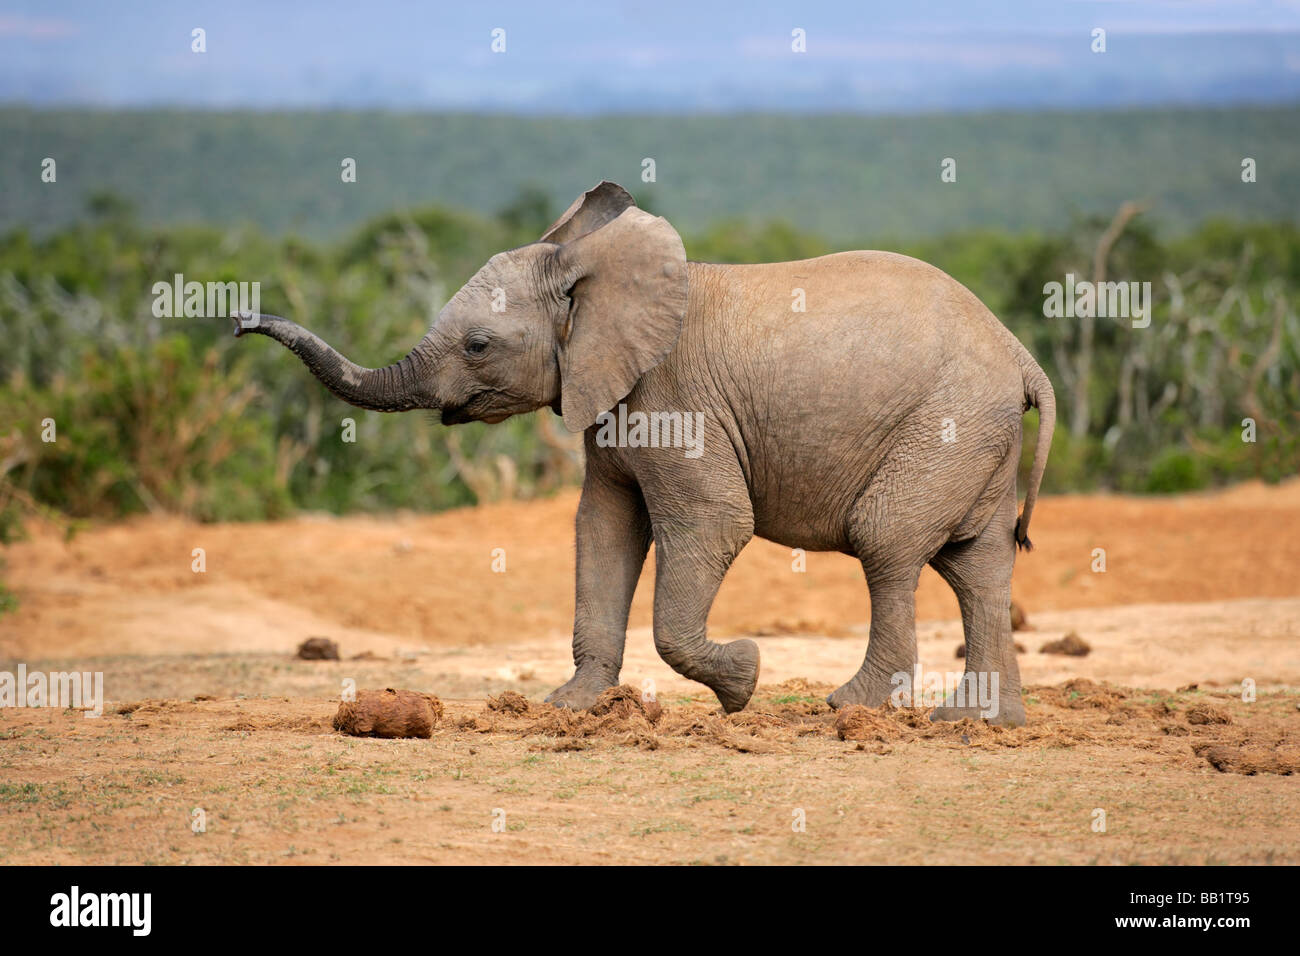 A young African elephant (Loxodonta africana), South Africa Stock Photo